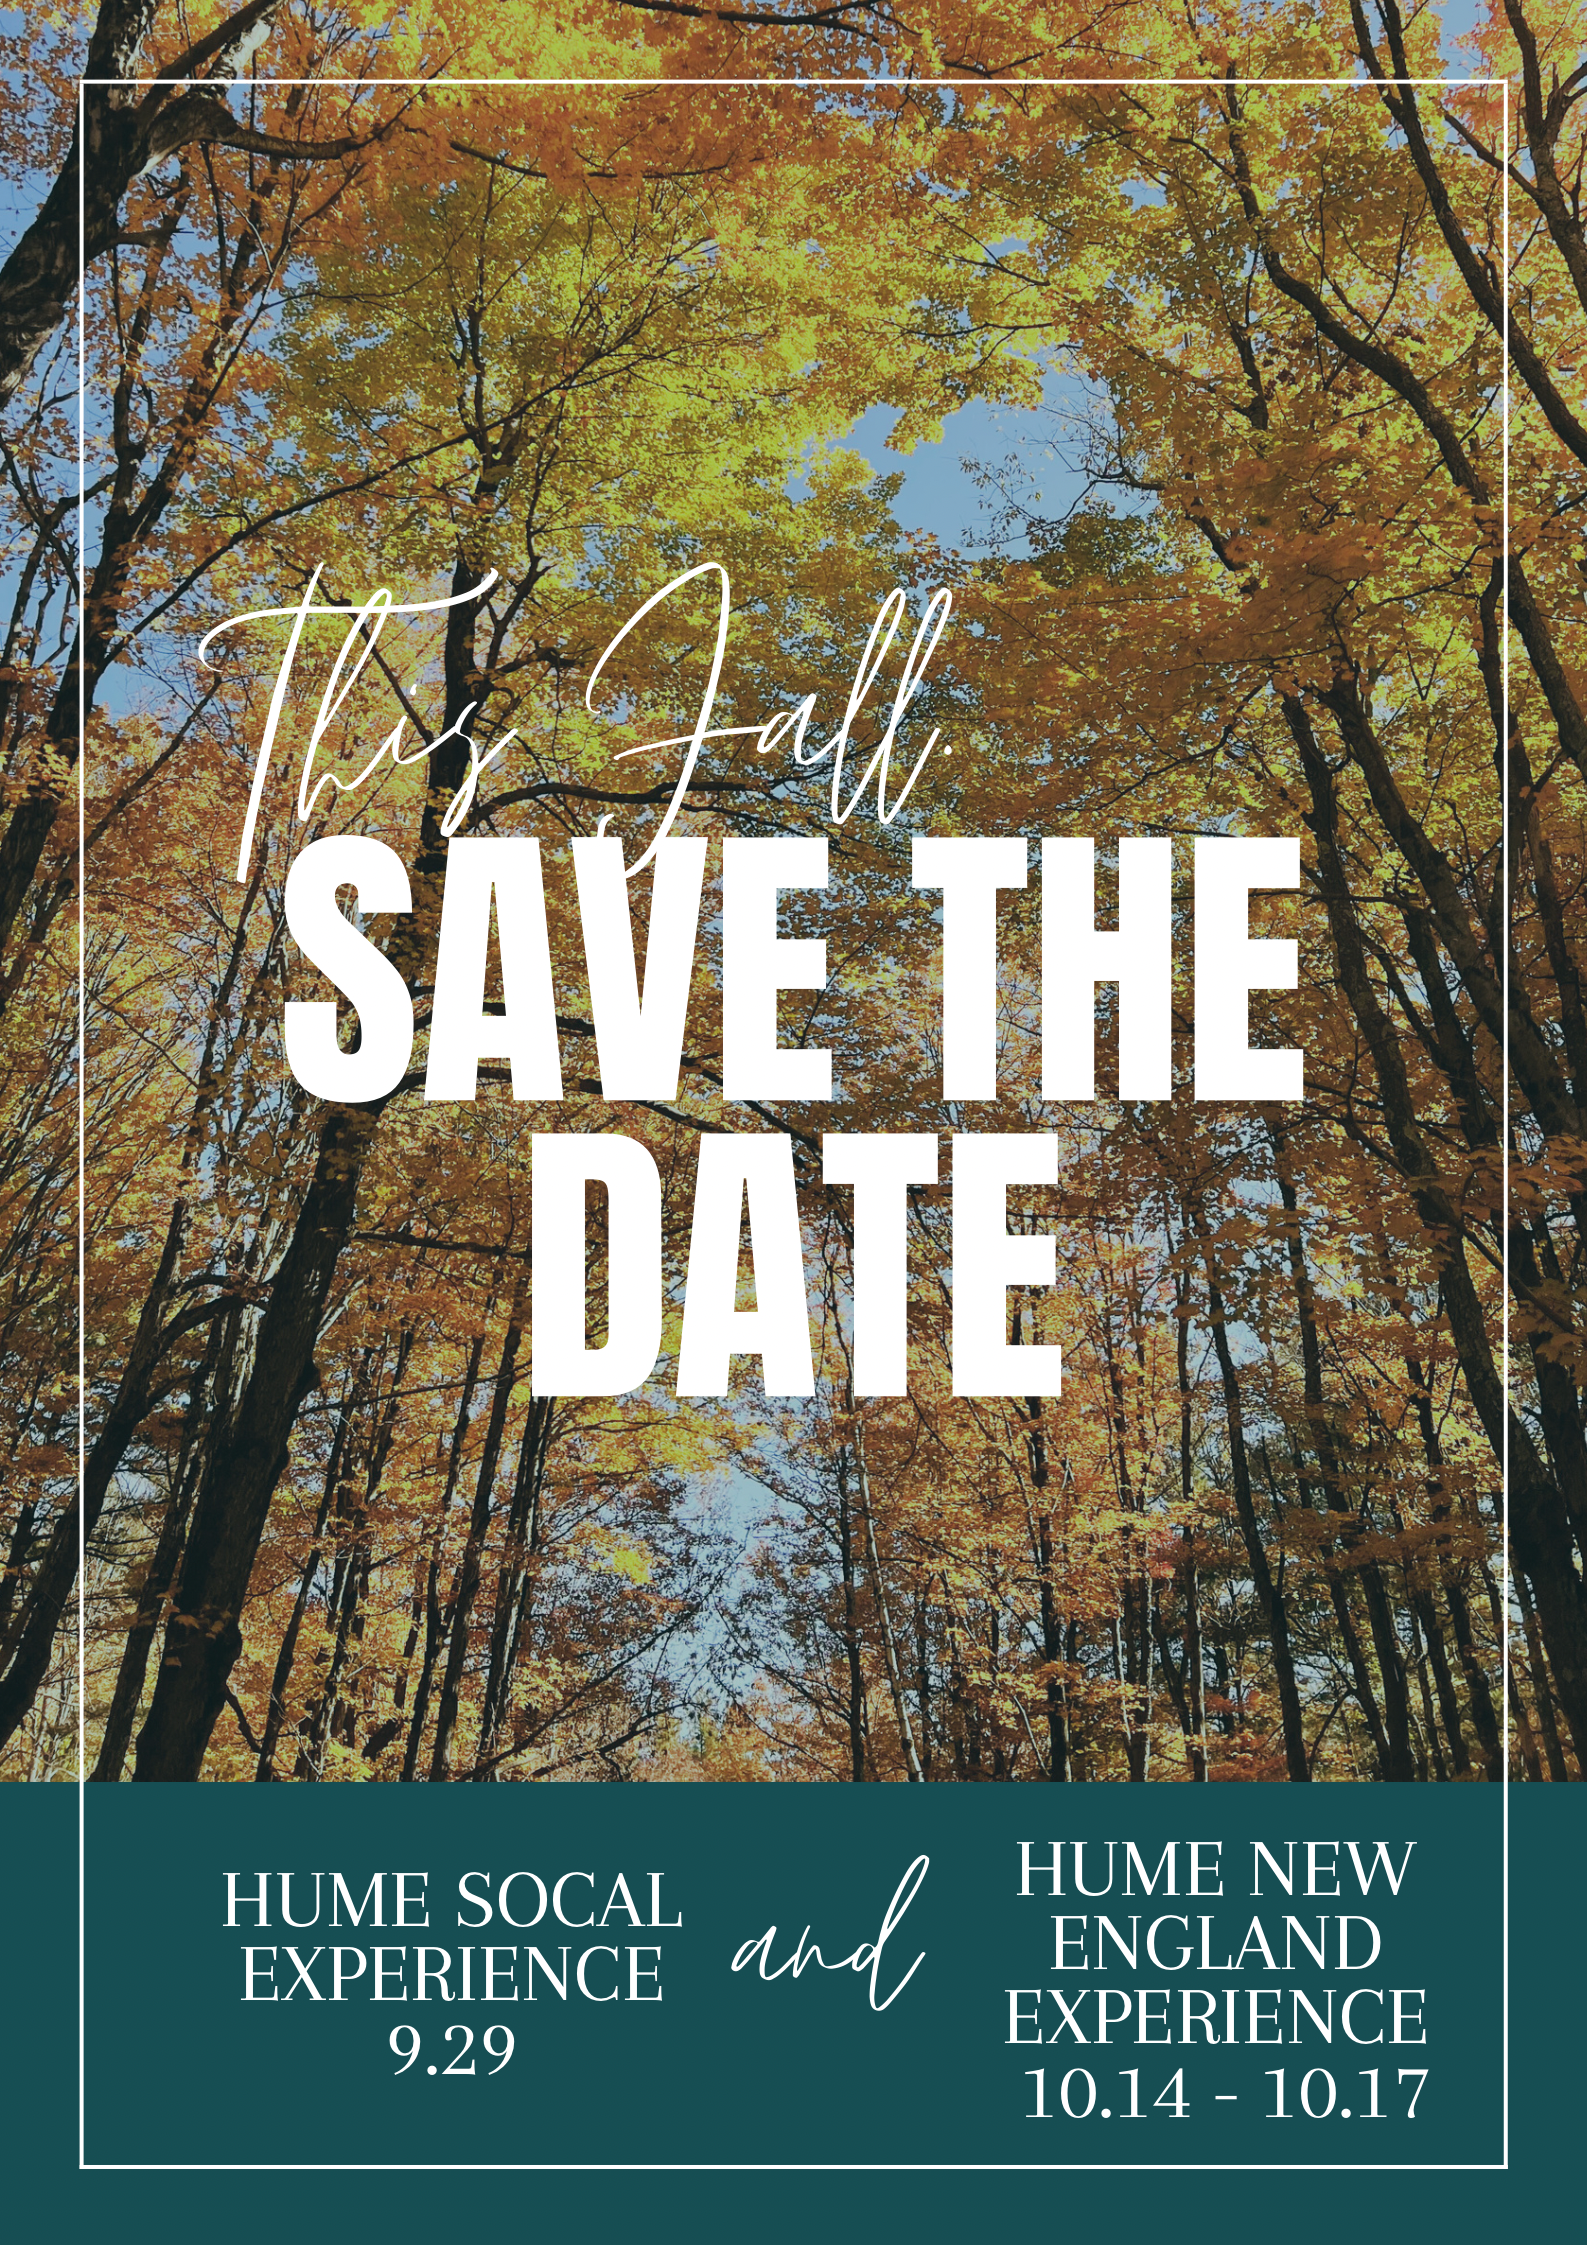 Save the Date… This Fall is going to be Exciting!